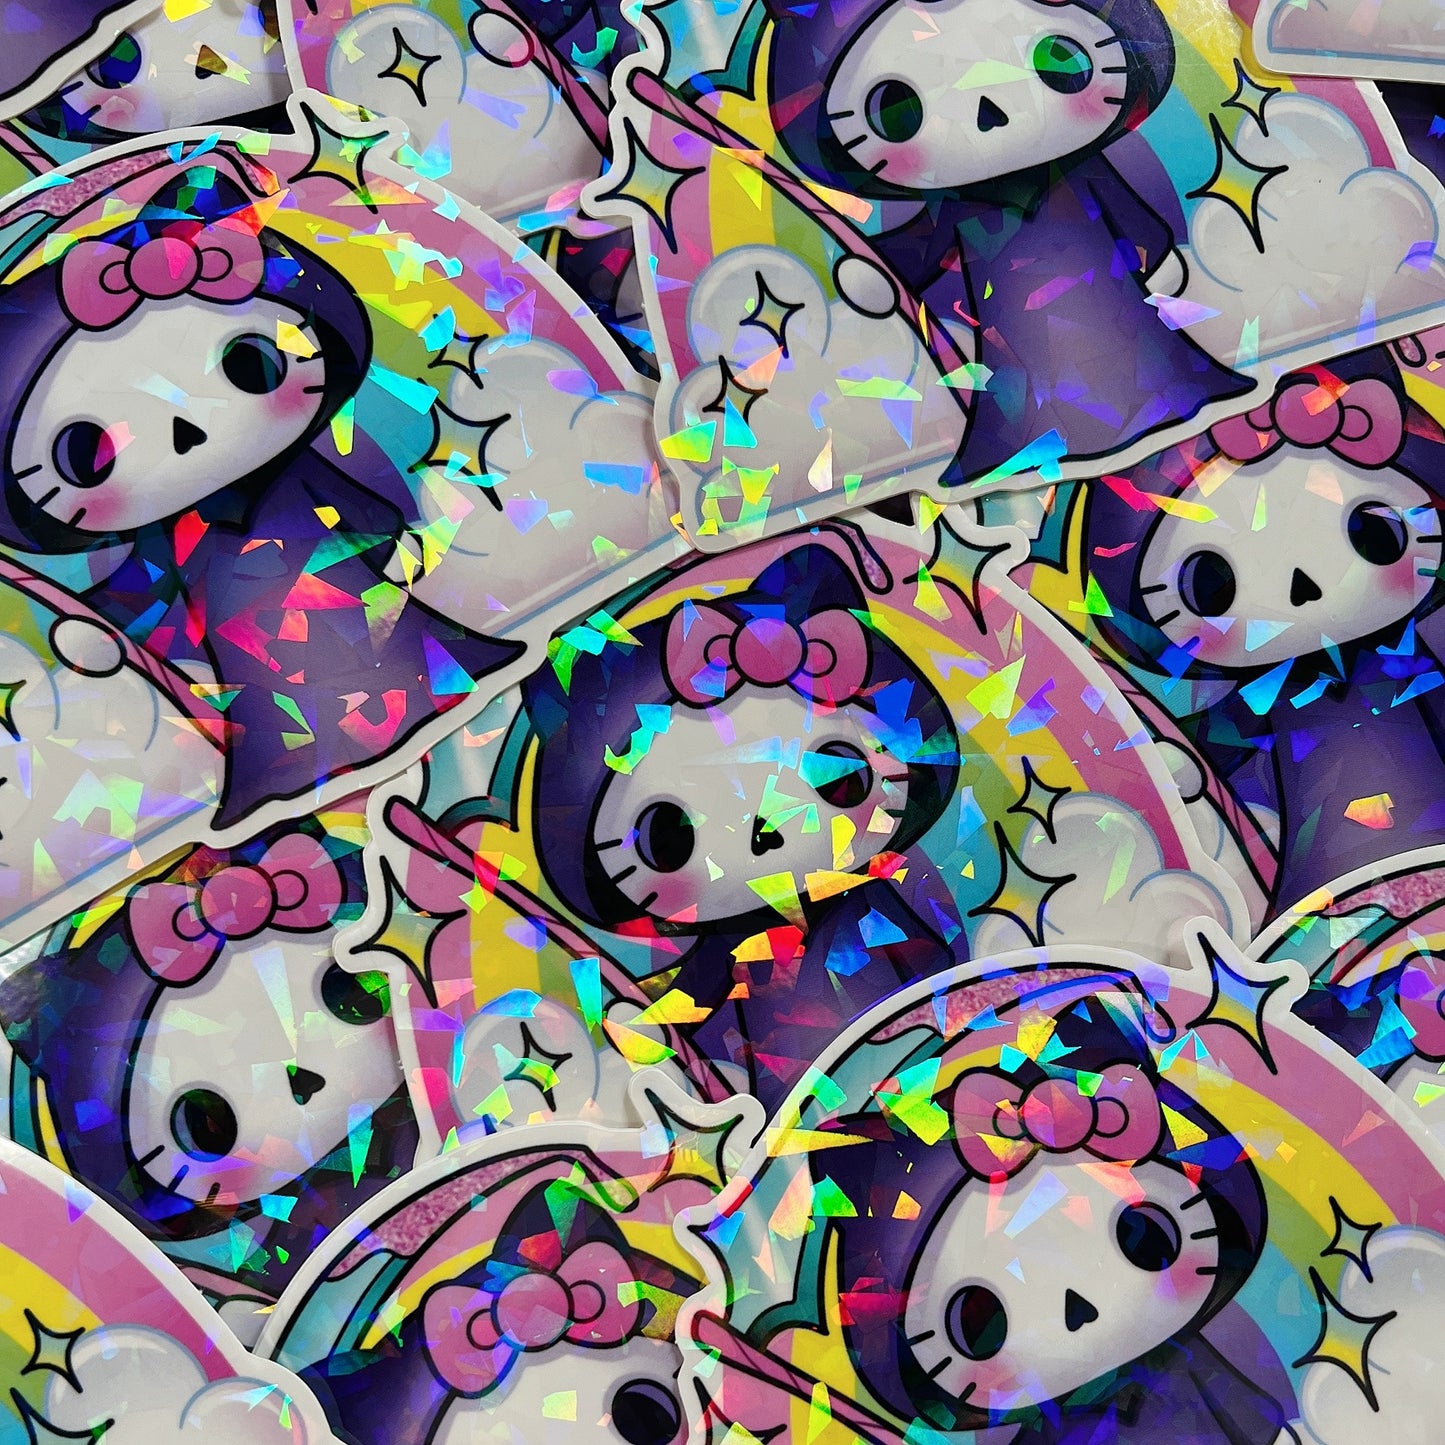 Goodbye Kitty Reaper - Holographic Sticker